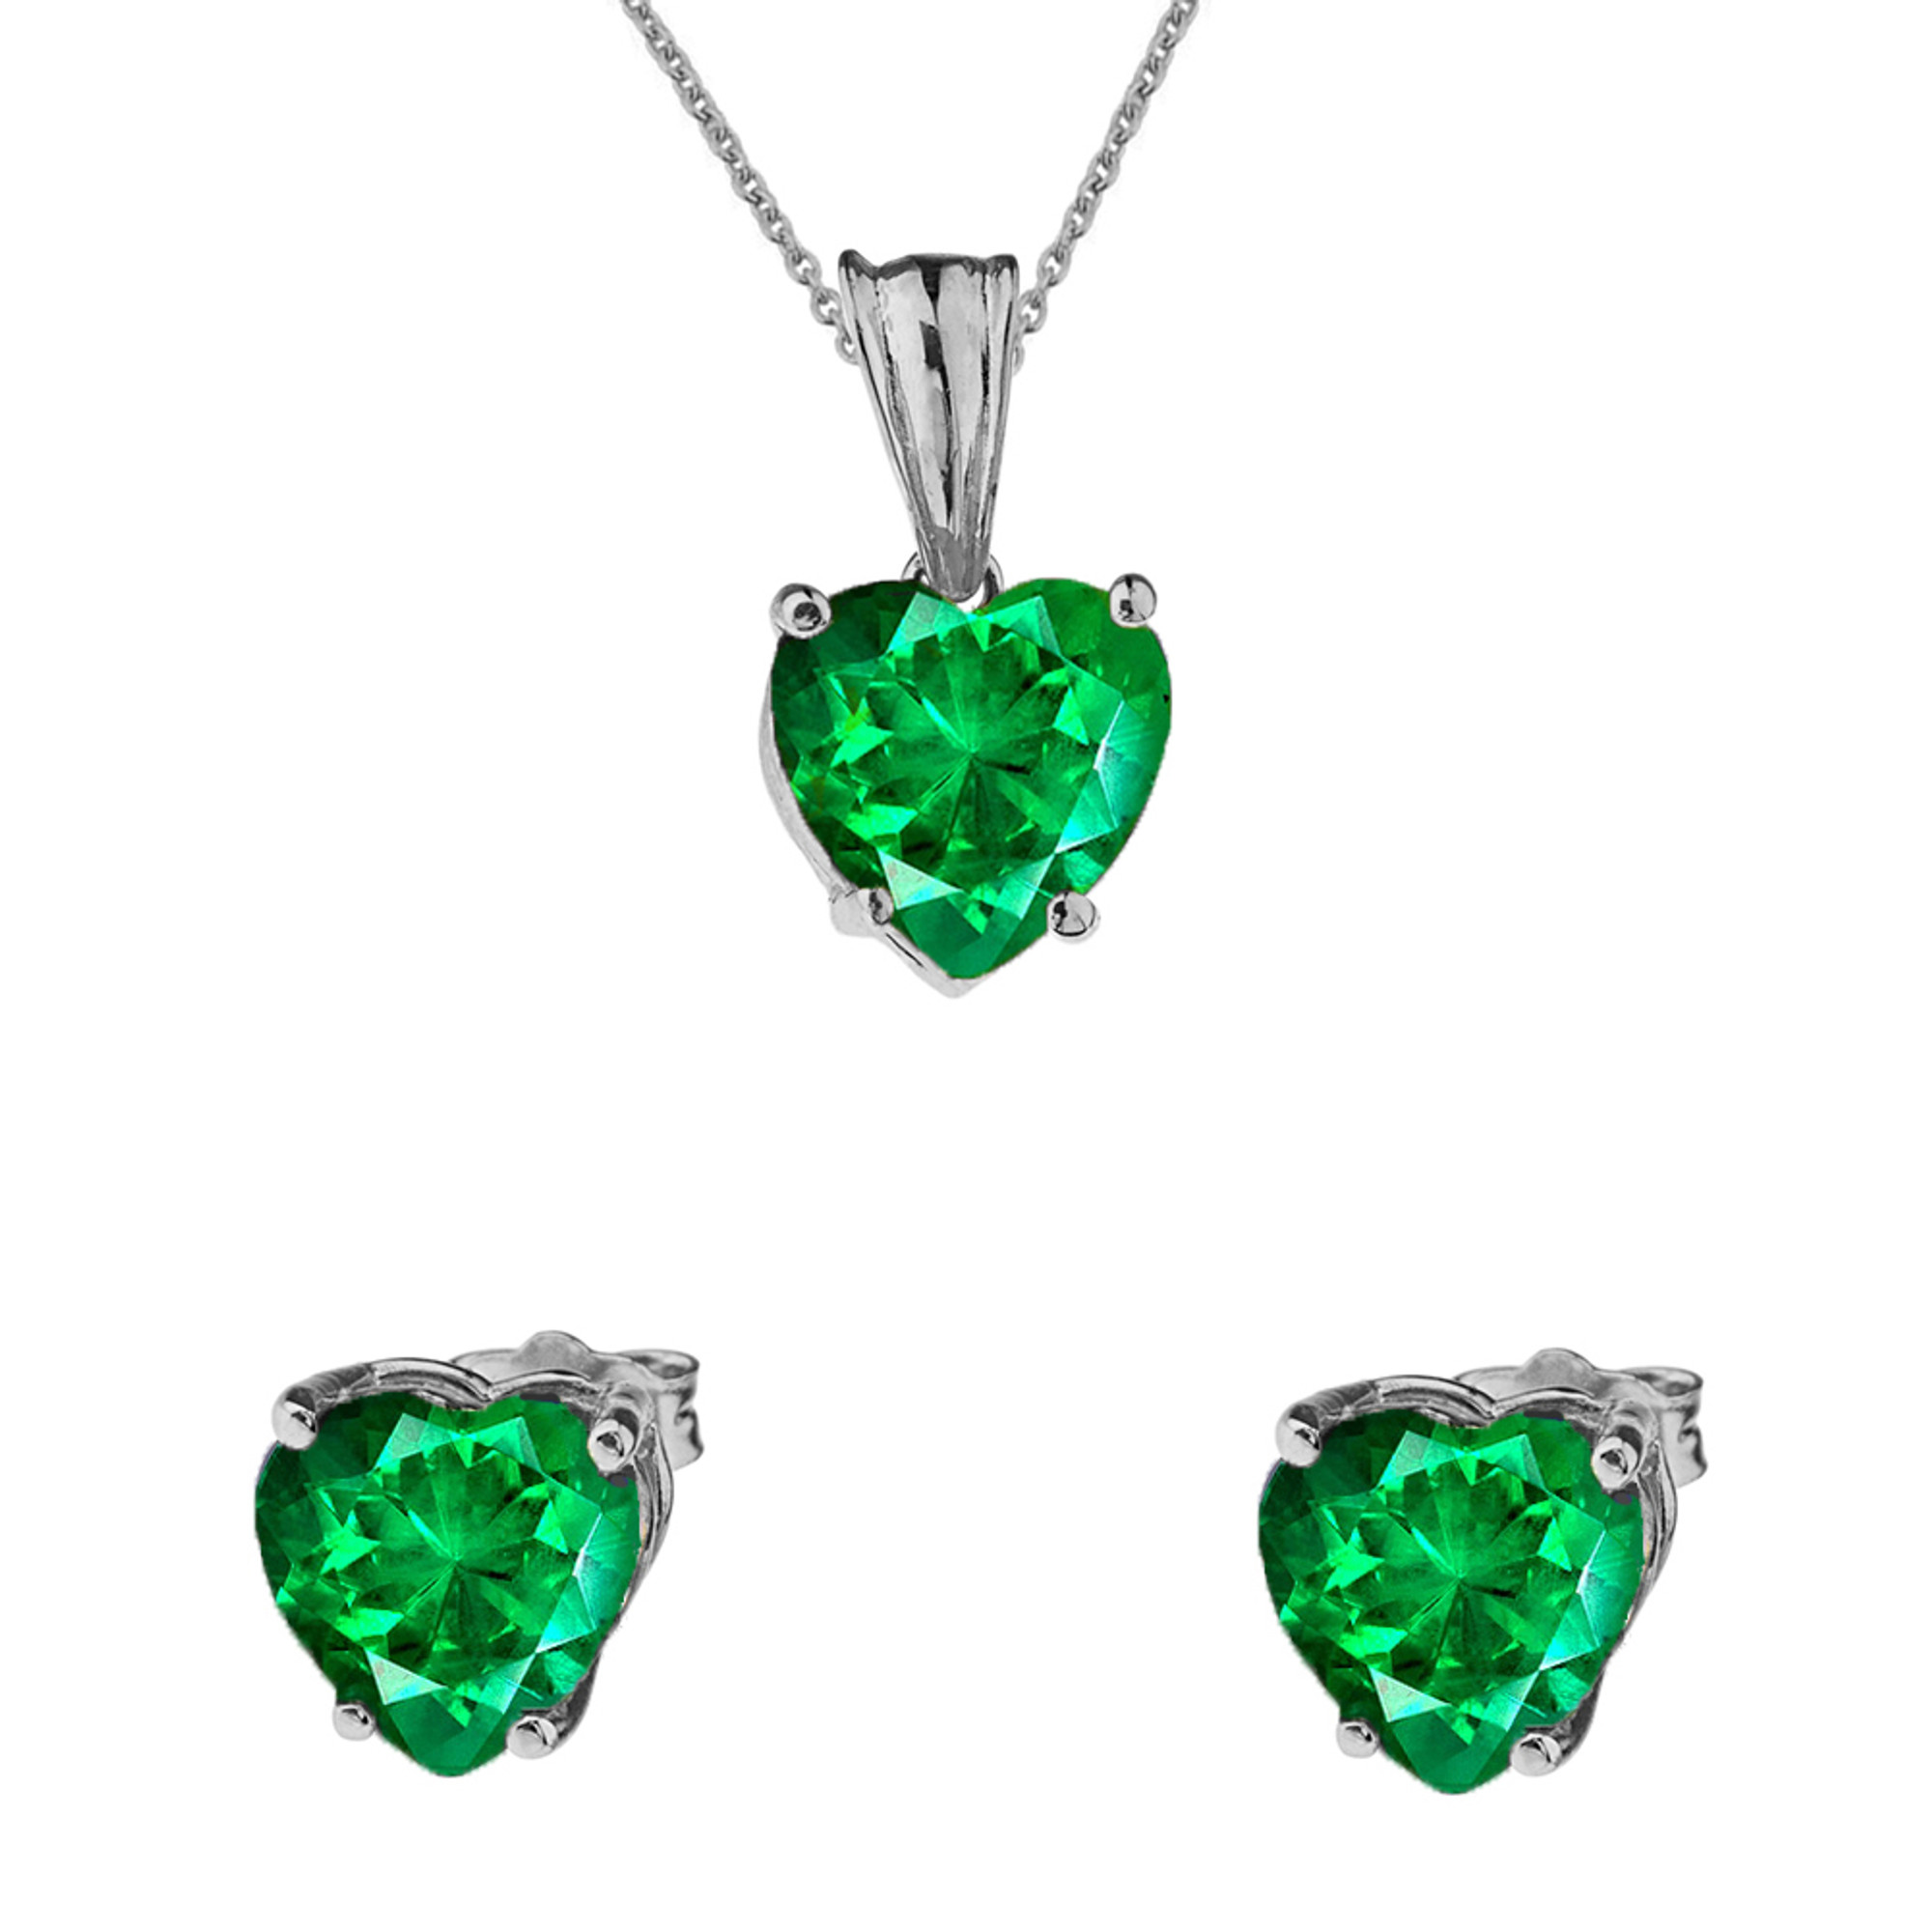 Vintage Emerald Jewelry Sets for Women Rings Pendant Necklace Drop Earrings  Wedding Cocktail Party Accessories Fine